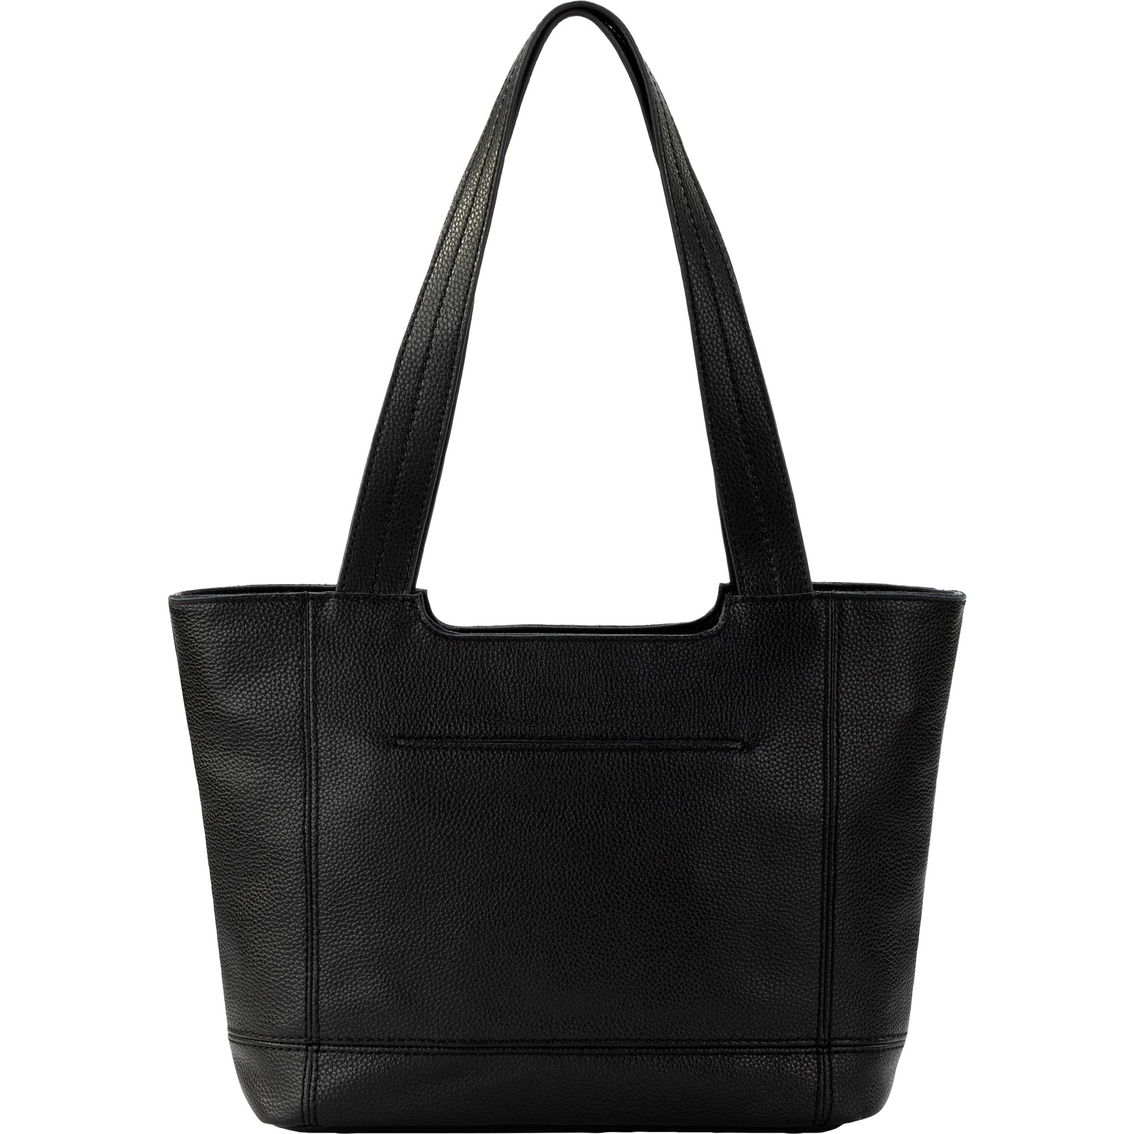 The Sak De Young Tote - Image 2 of 5